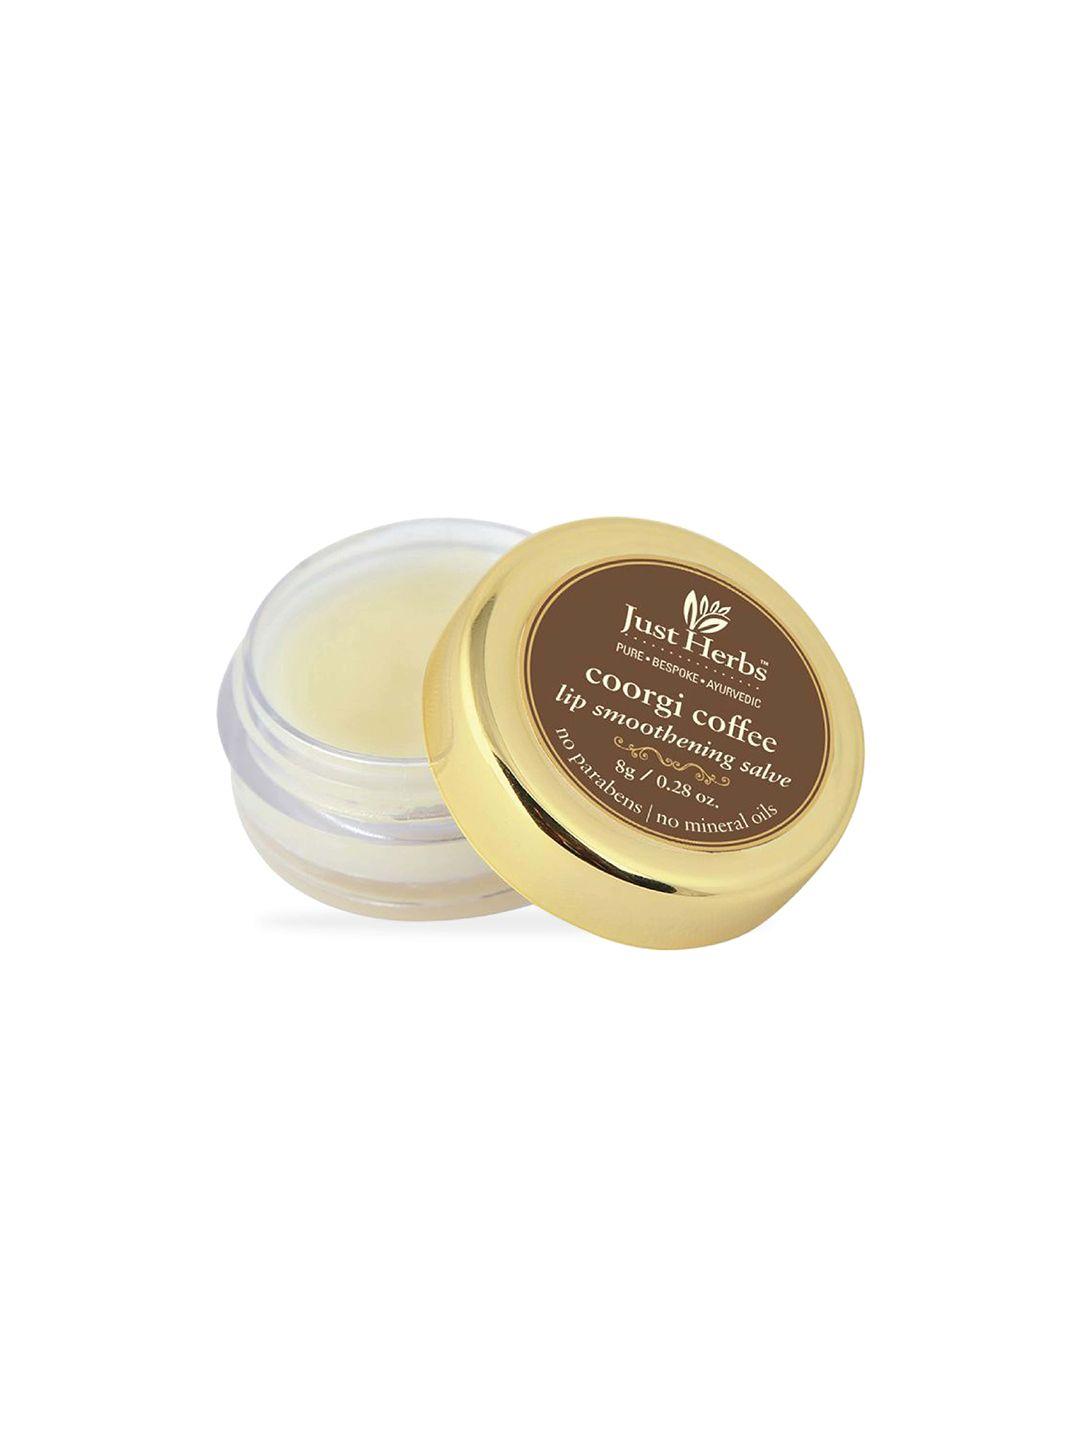 just-herbs-coffee-lip-balm-with-coffee-&-shea-butter-for-dry-&-rough-lips---8g